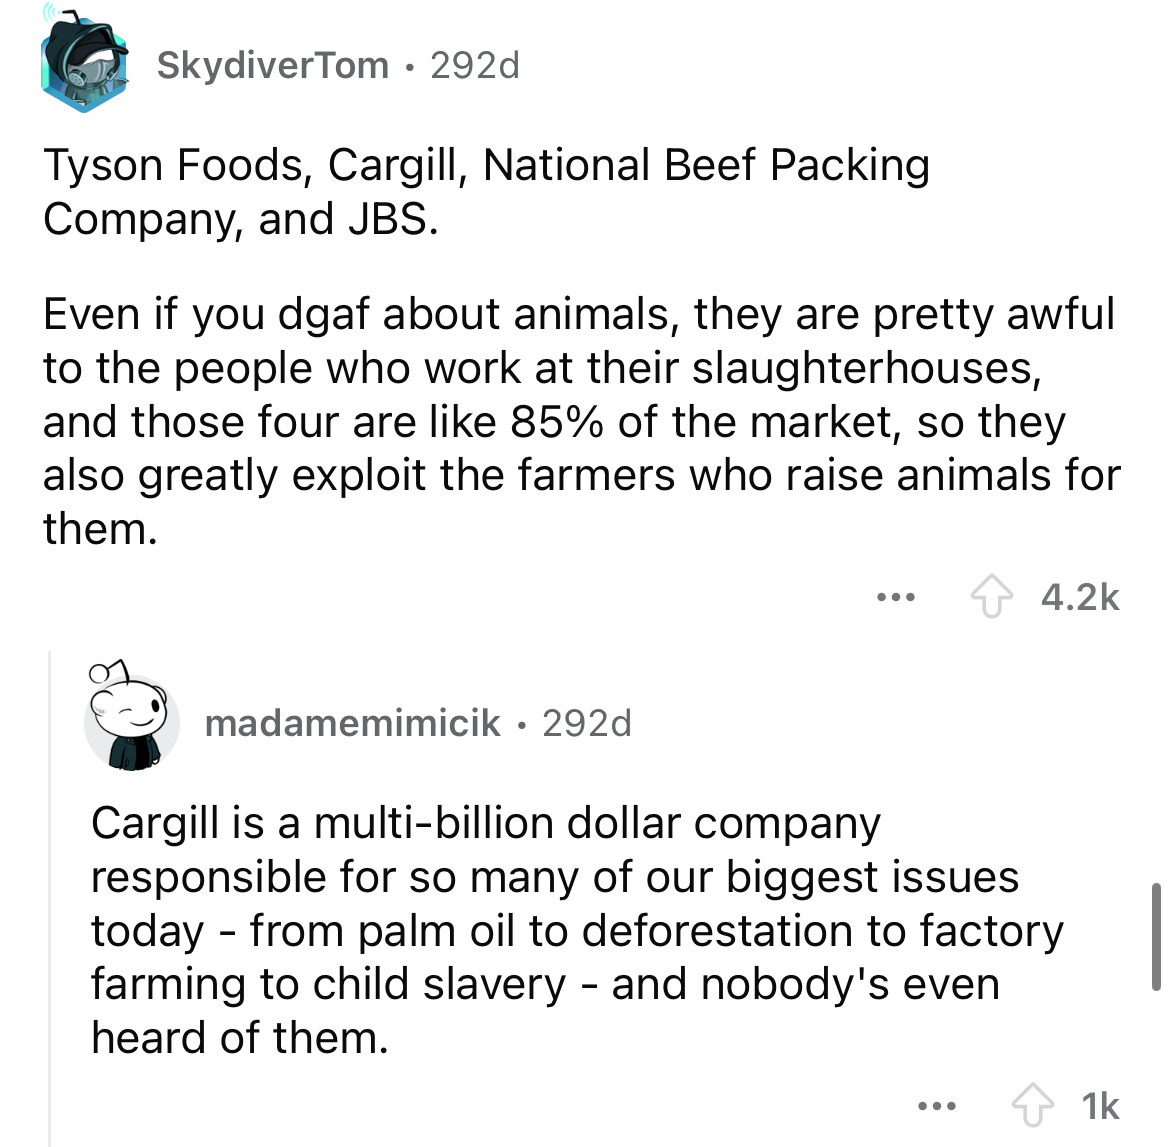 screenshot - SkydiverTom. 292d Tyson Foods, Cargill, National Beef Packing Company, and Jbs. Even if you dgaf about animals, they are pretty awful to the people who work at their slaughterhouses, and those four are 85% of the market, so they also greatly 